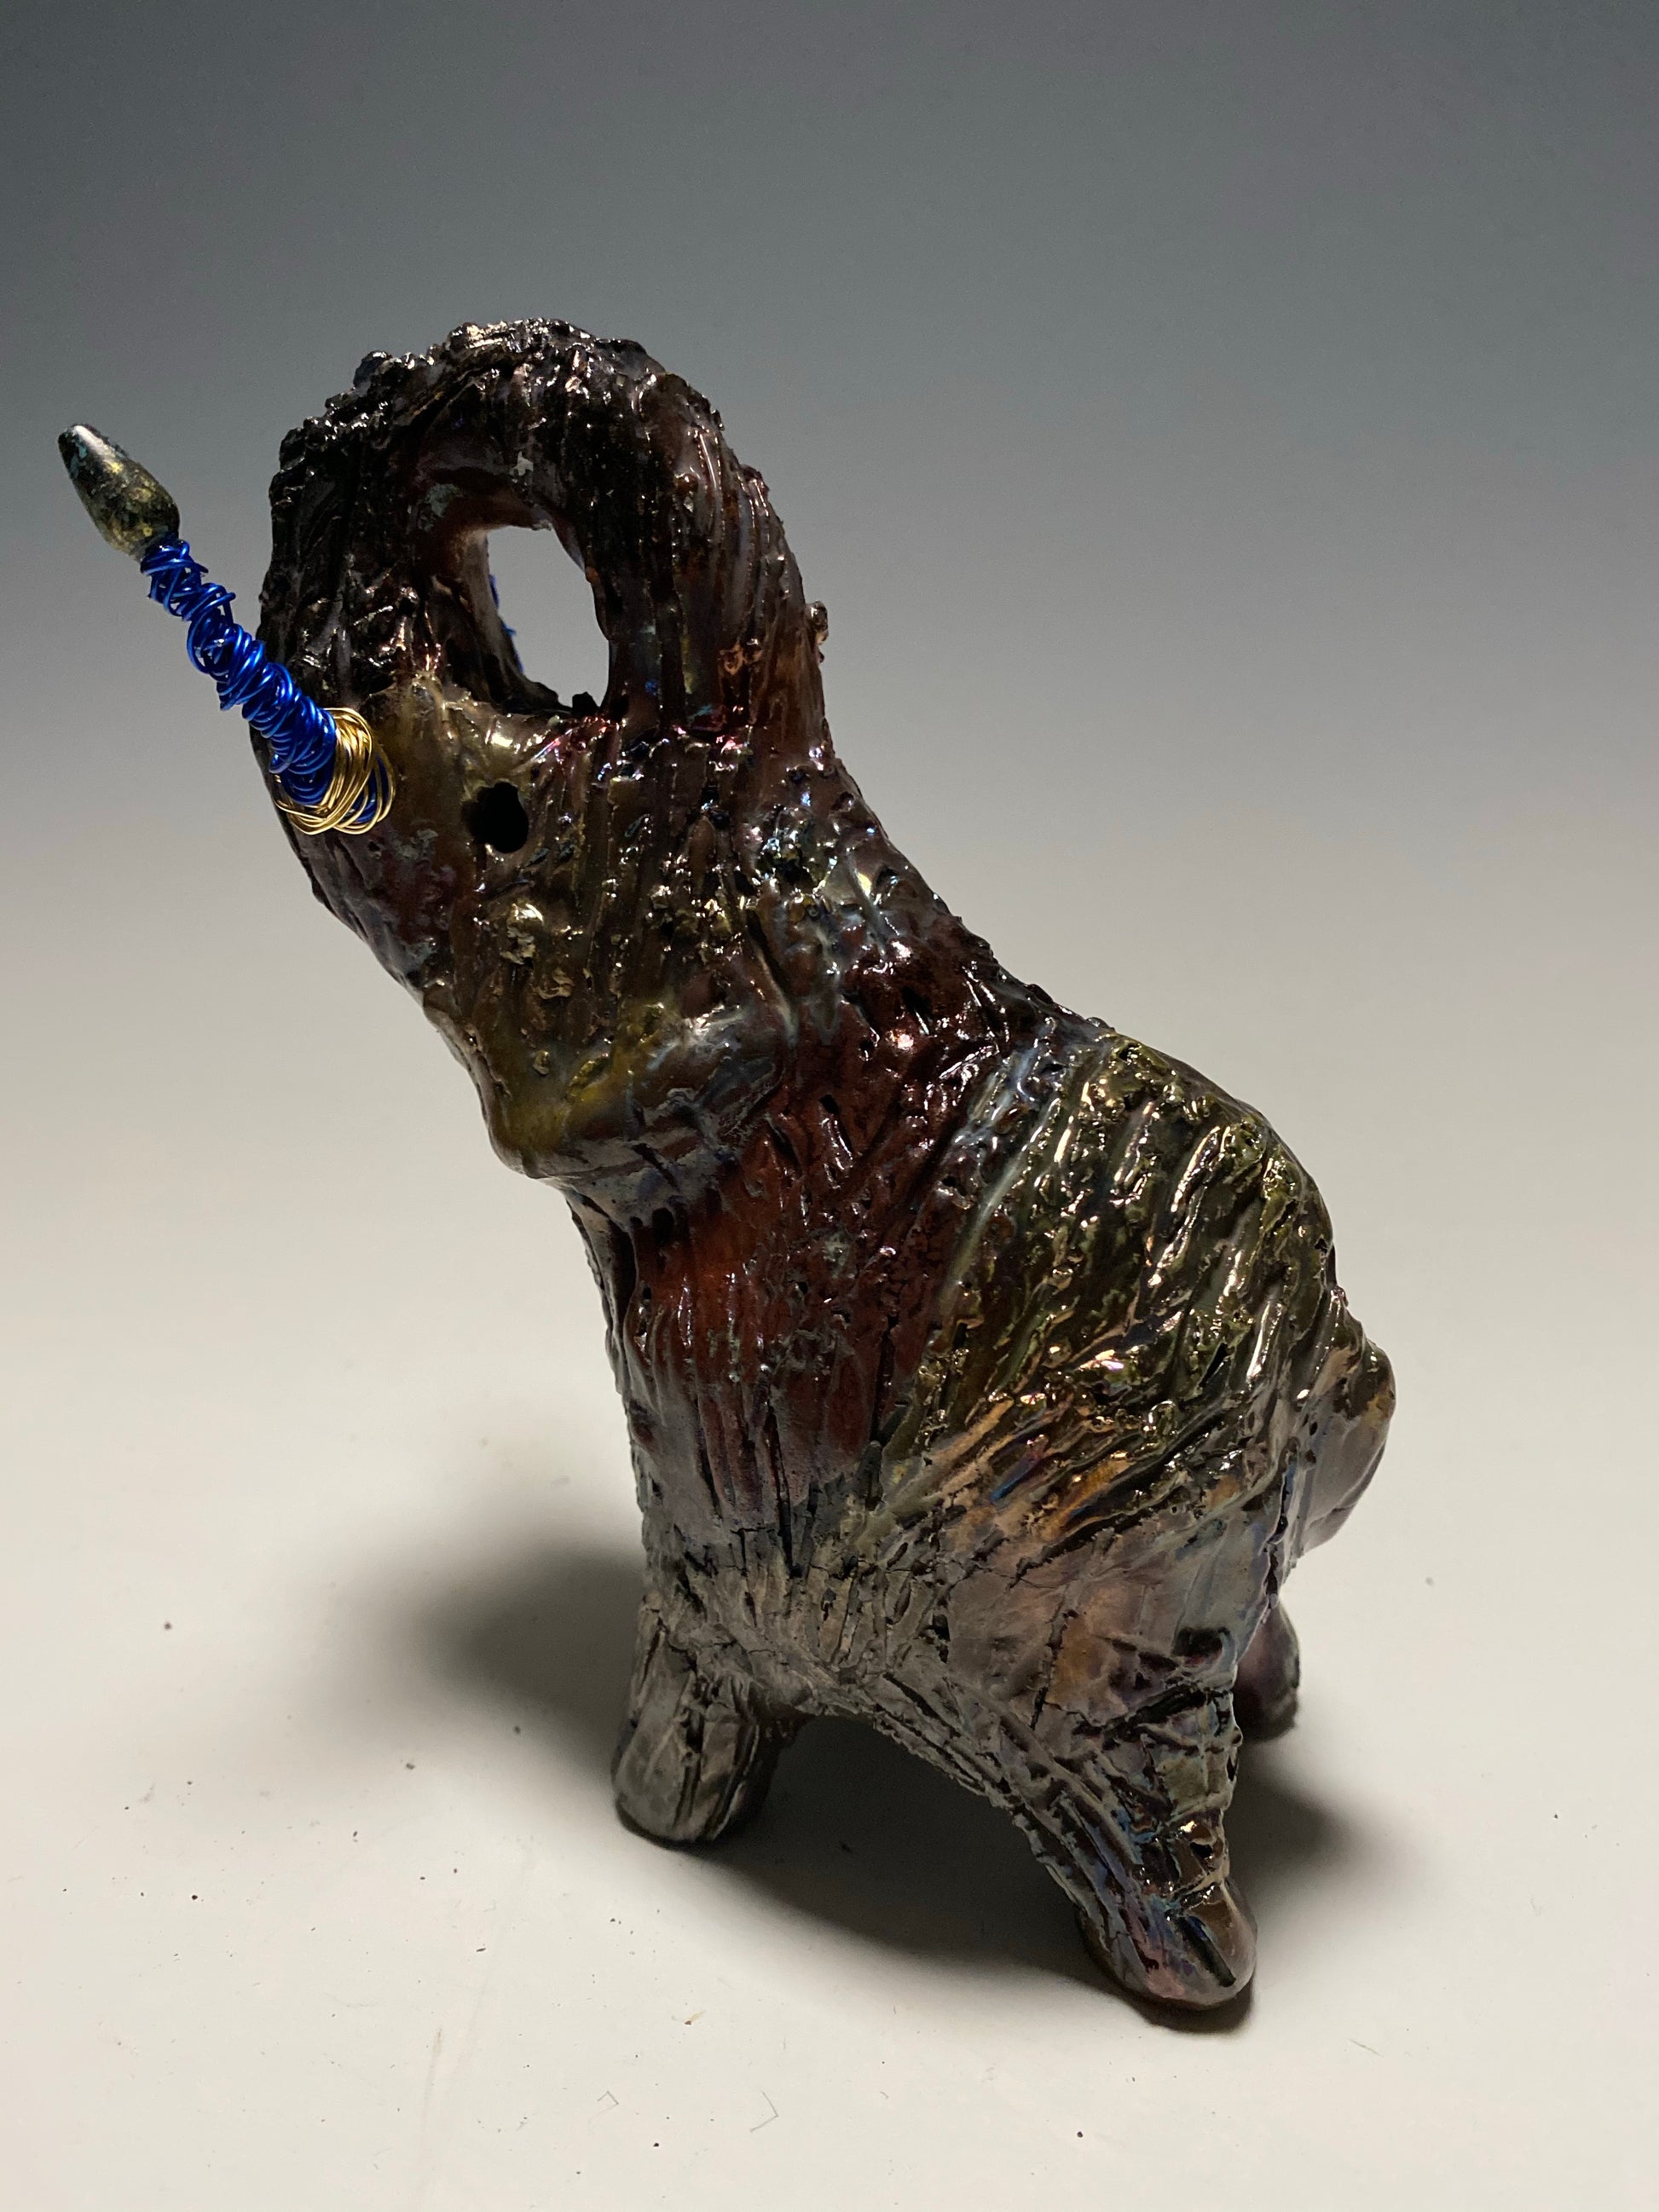 Raku Elephant Have you HERD!!!!!!  Just one of these lovely Raku Fired Elephant will make an excellent gift for your  friend, sorority or for your home’ special place centerpiece.   6" x 4" x 4" 1 lbs Beaded tusk with blue and gold wire Beautiful  colorful metallic raku elephant For decorative purposely only